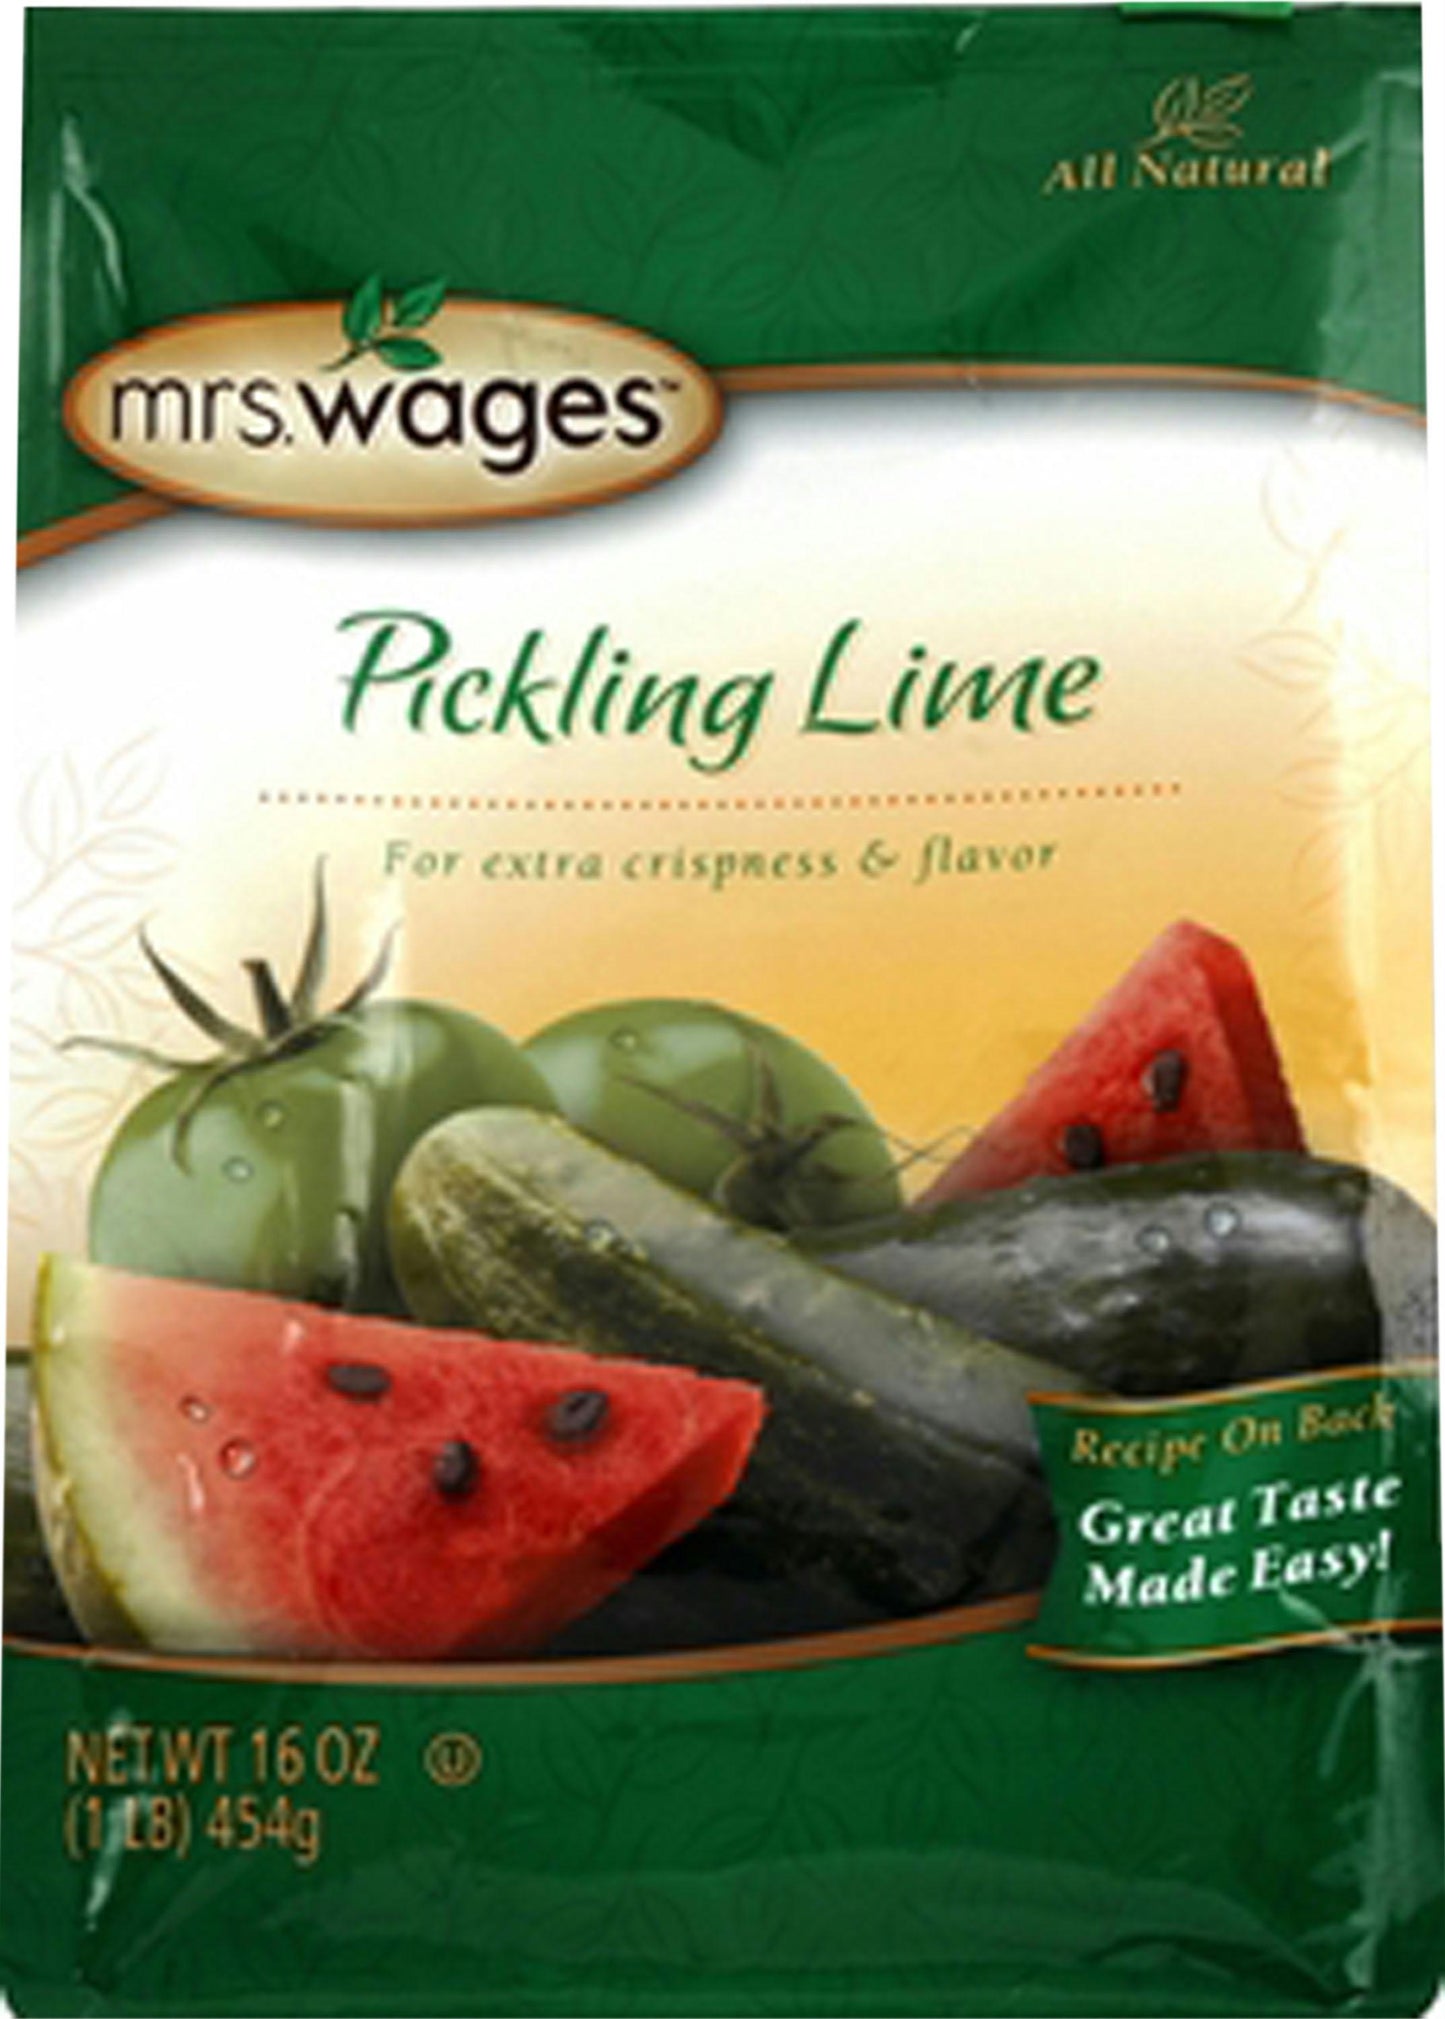 Mrs. Wages Pickling Lime Seasoning - aomega-products